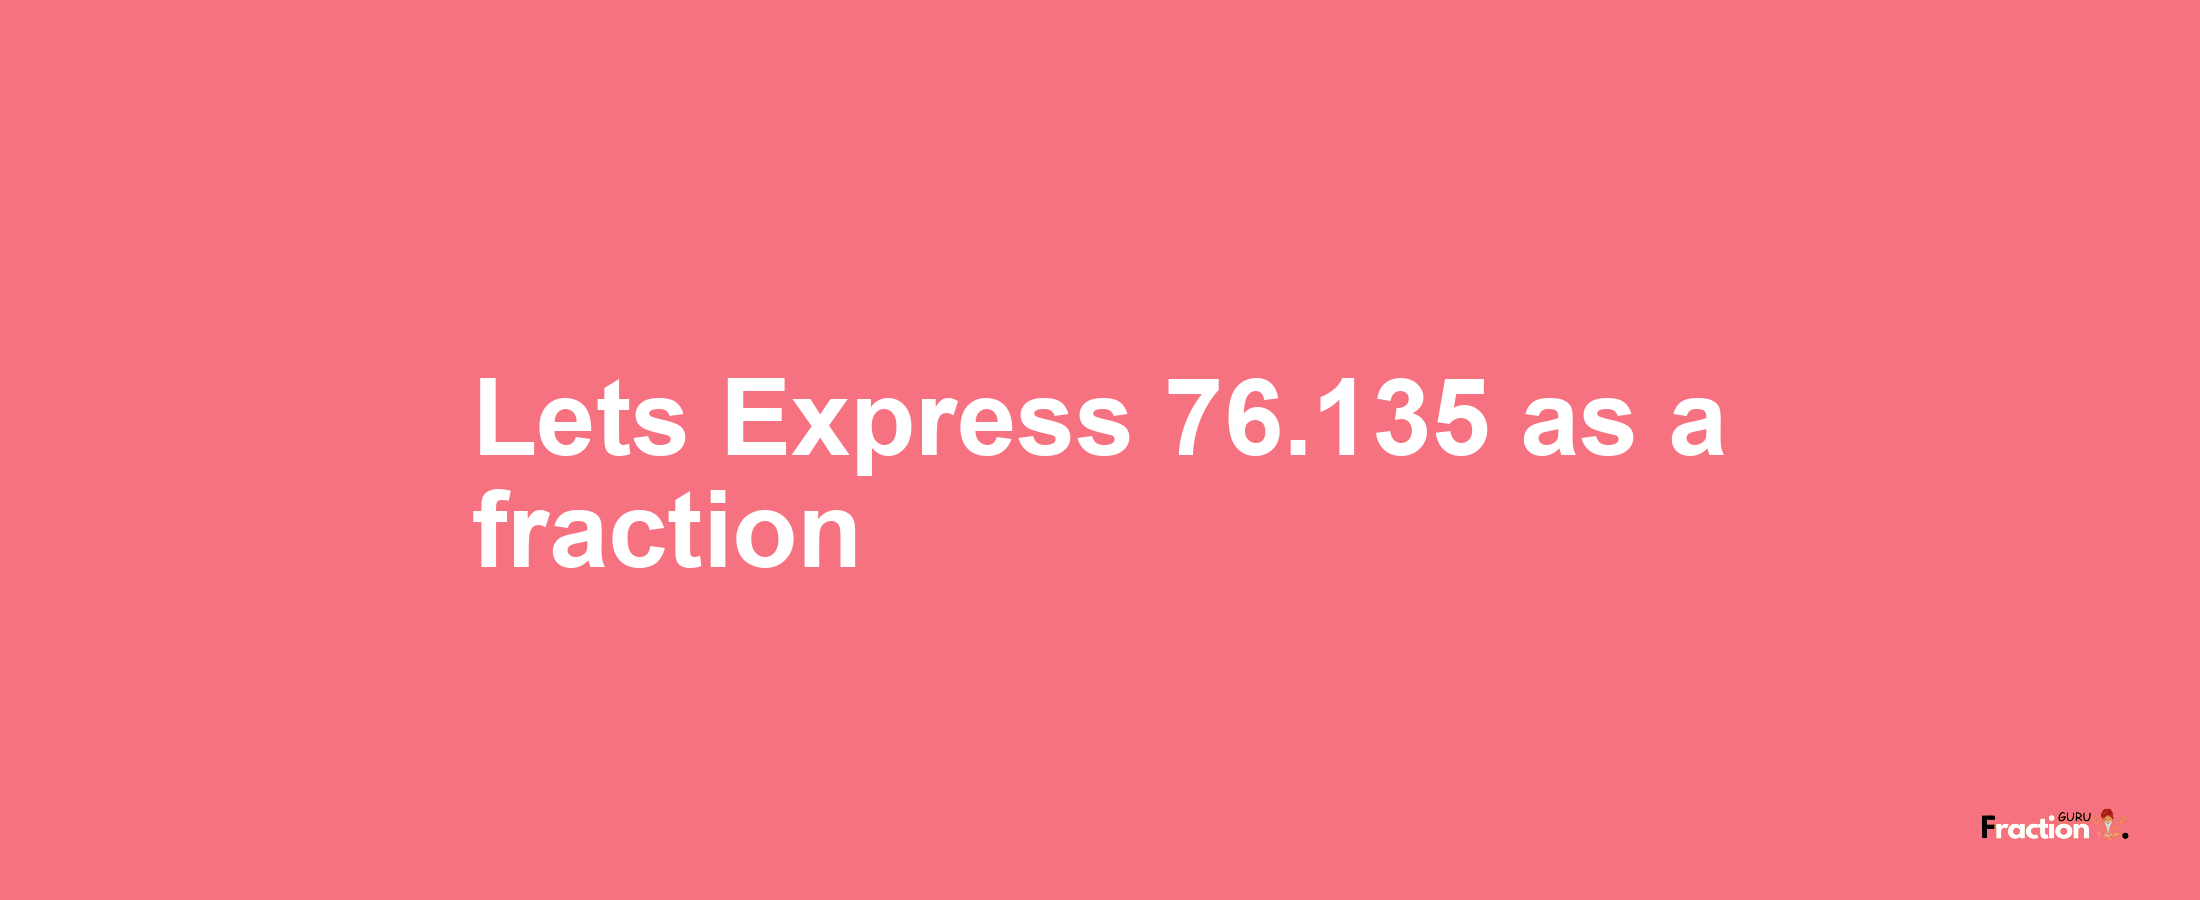 Lets Express 76.135 as afraction